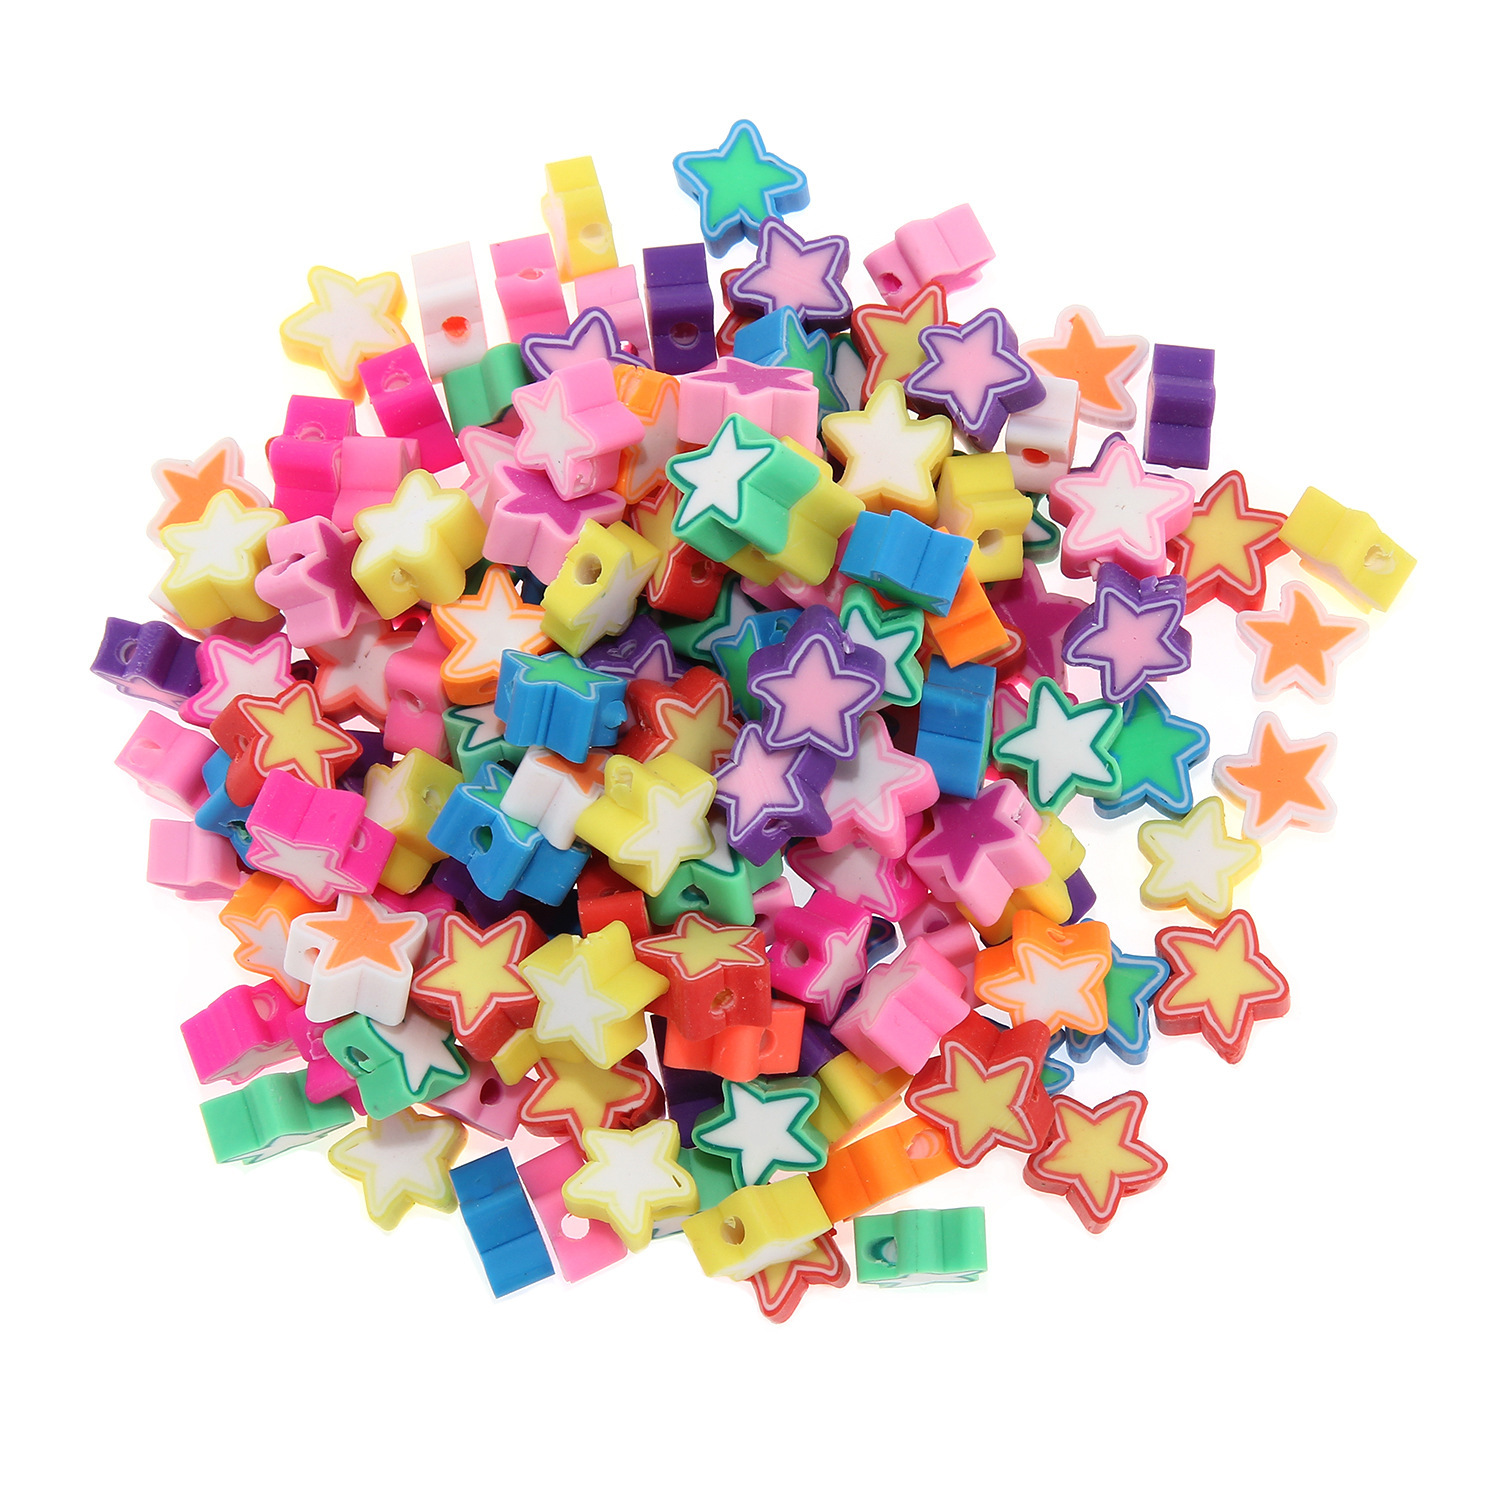 11:100 mixed color five-pointed stars K225